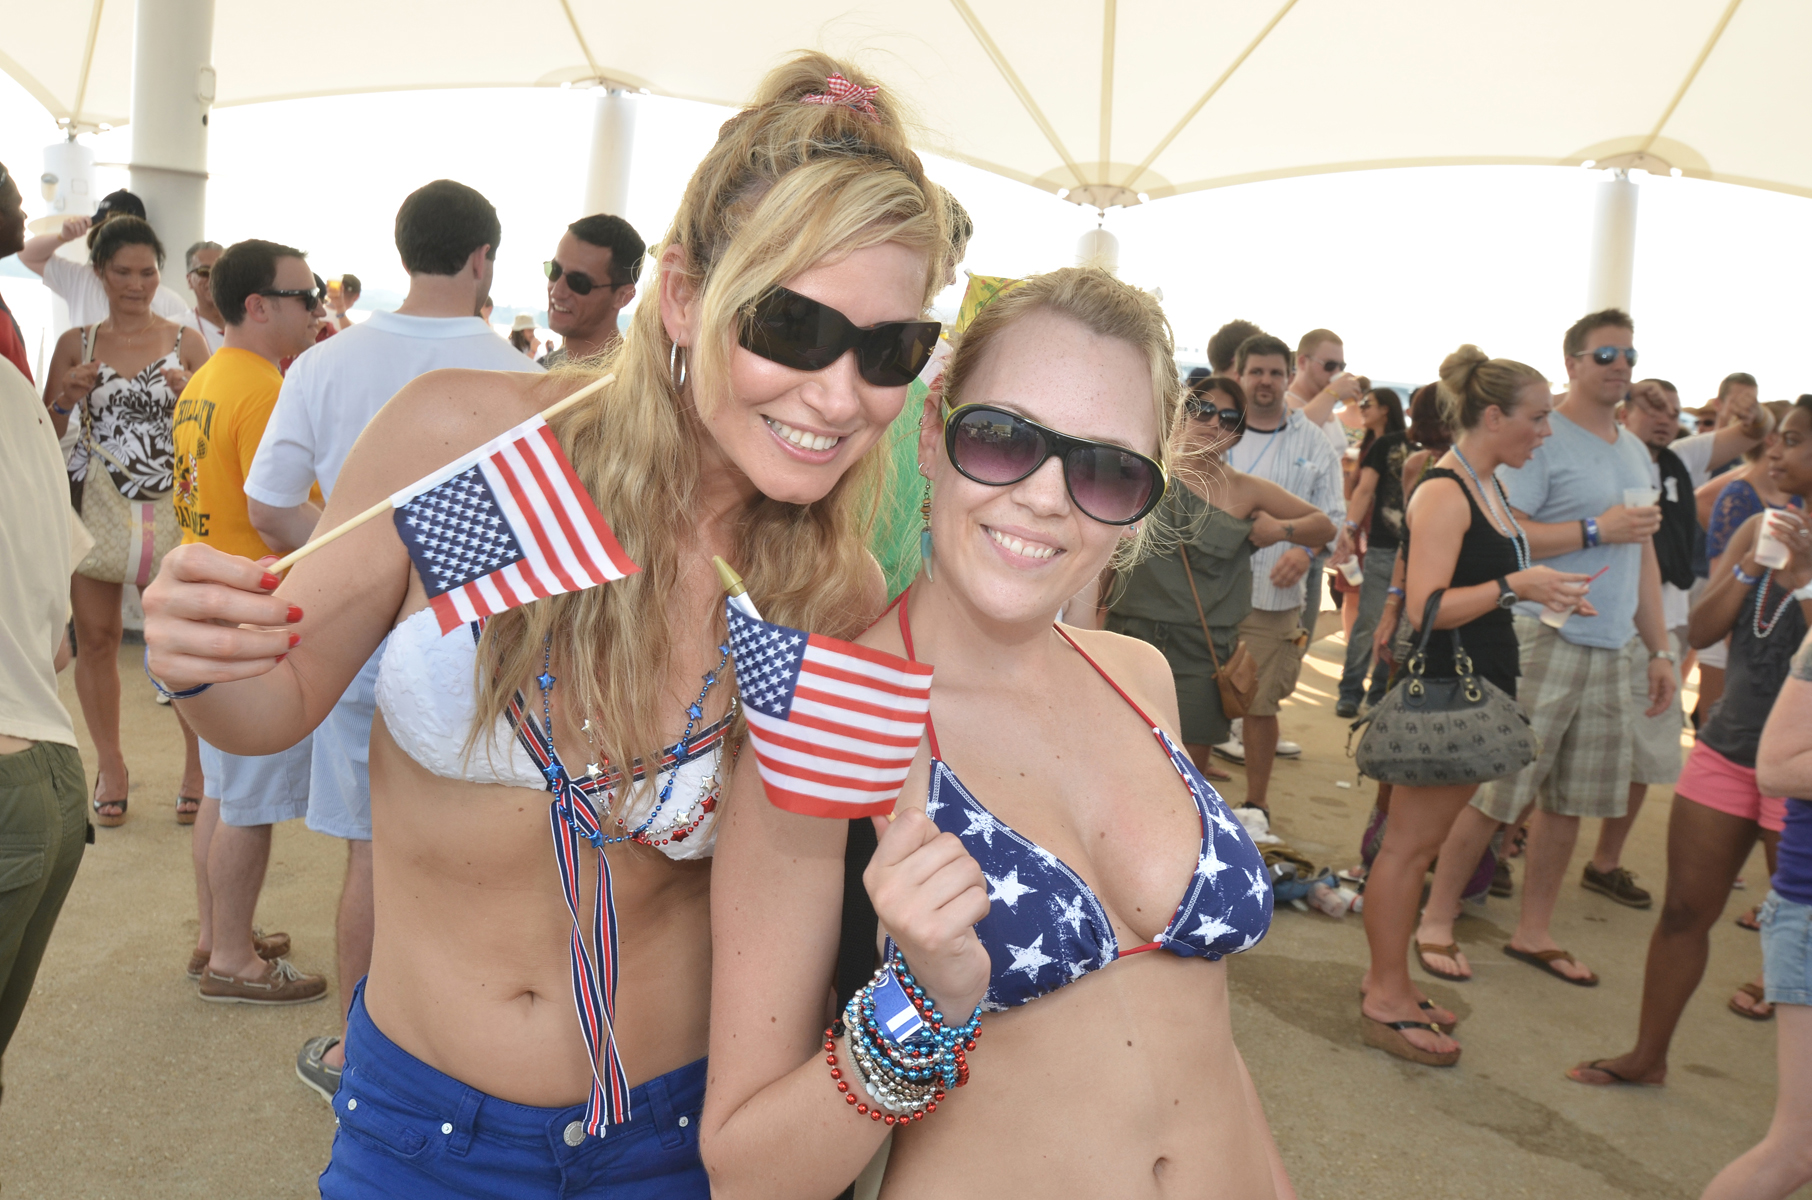 [Party Pix] Inside the Great American Festival